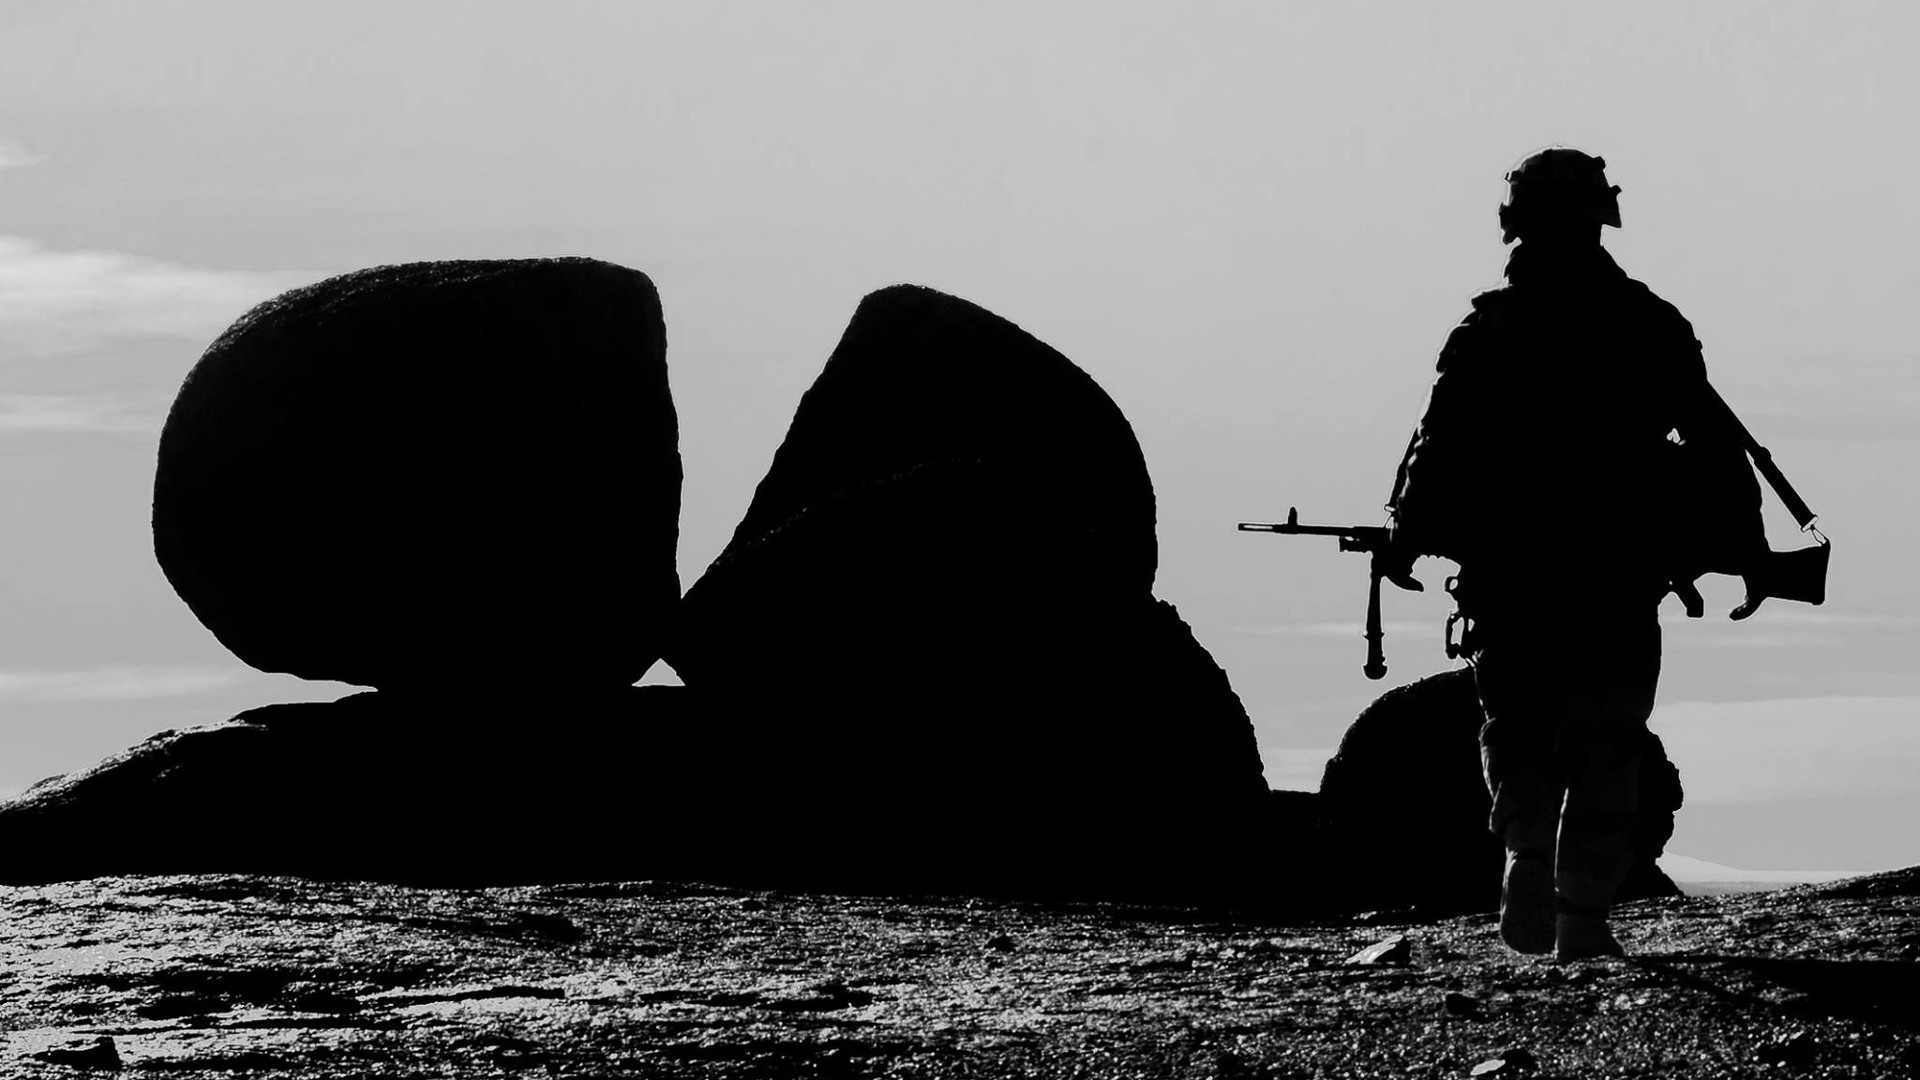 General 1920x1080 military soldier Mali silhouette